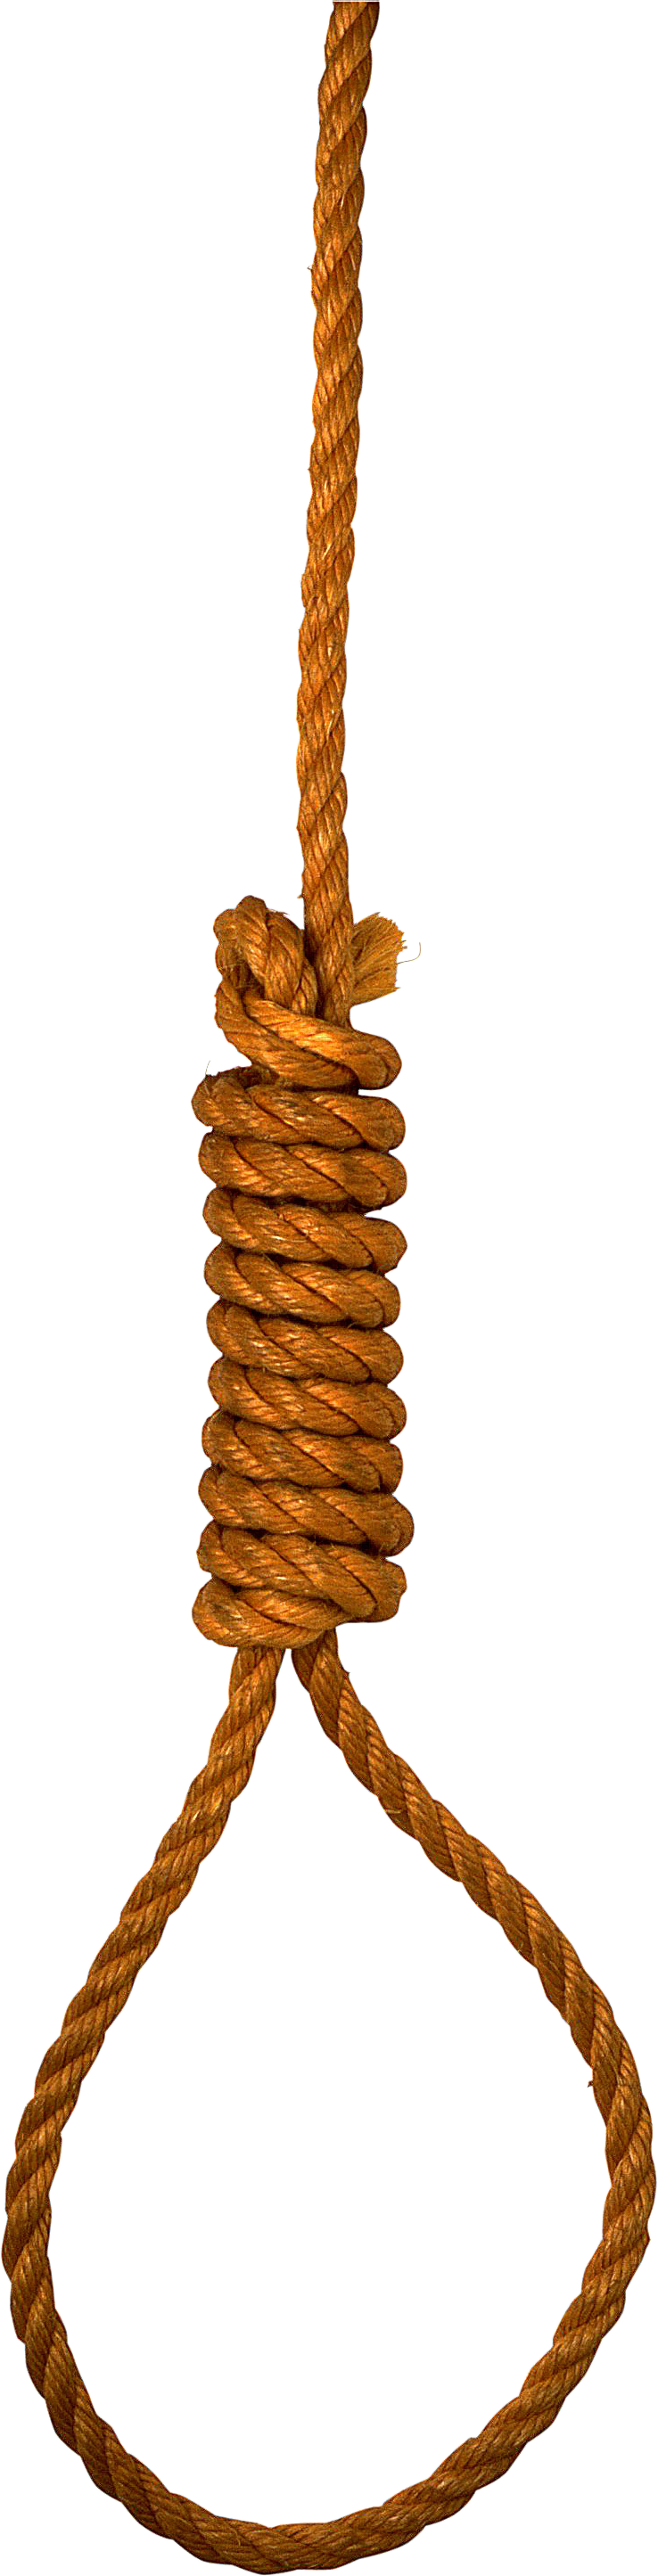 rope loop PNG transparent image download, size: 738x2890px